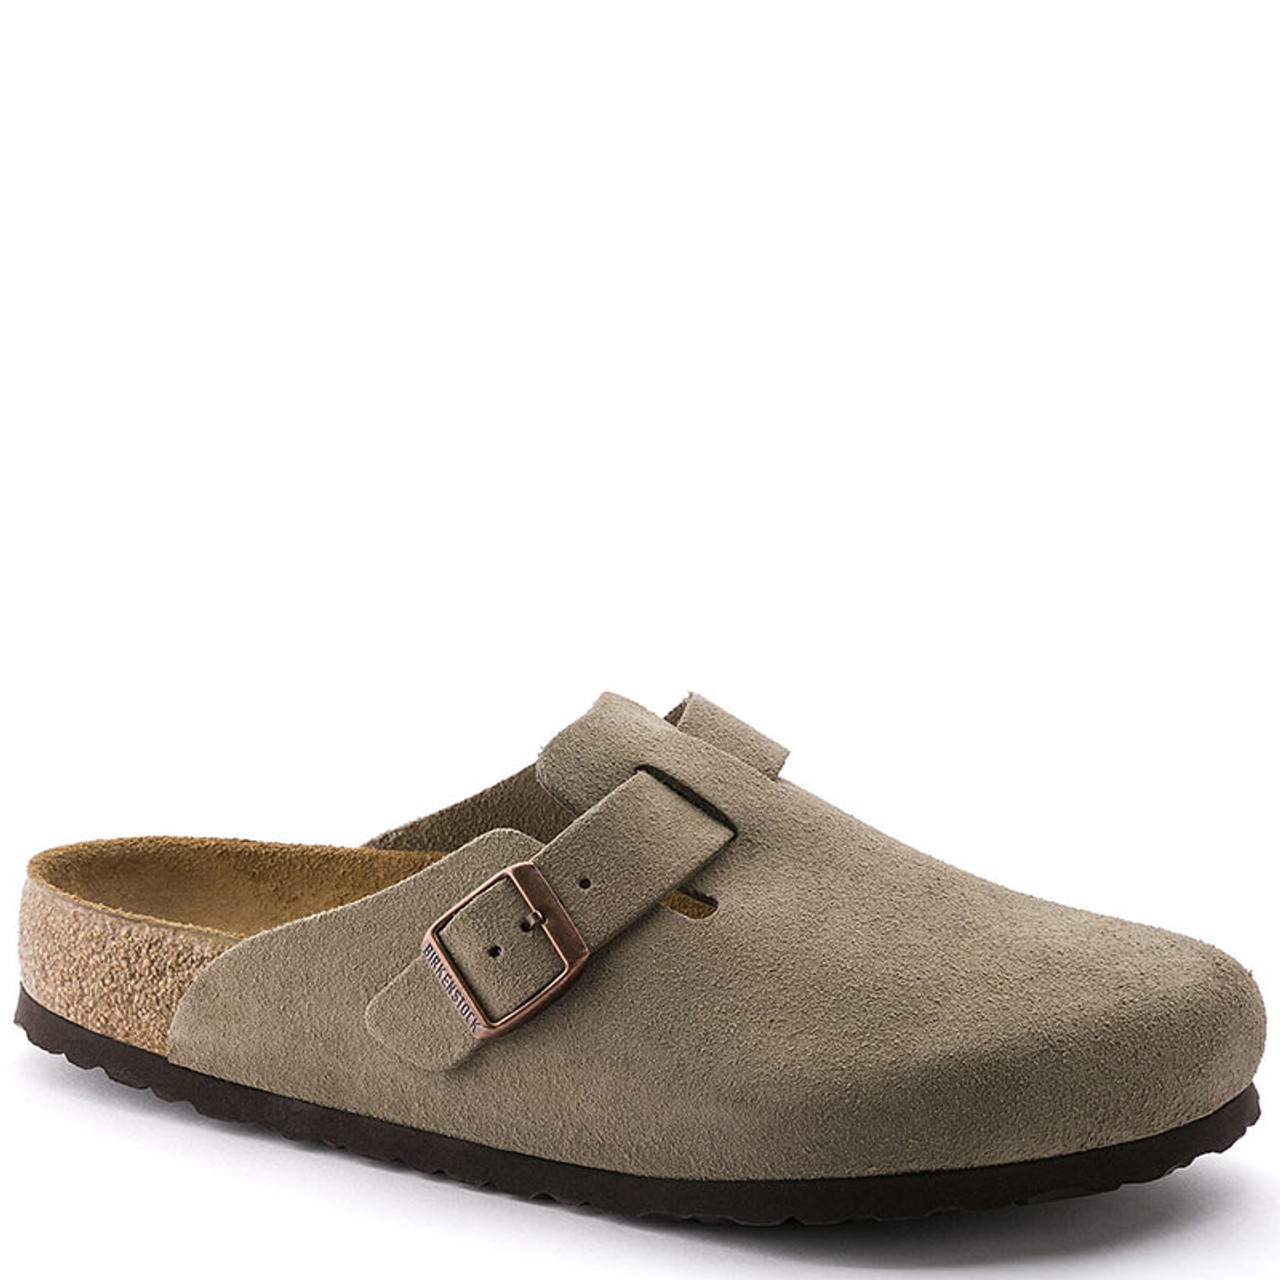 Birkenstock 560771 Women's BOSTON SOFT FOOTBED Clogs Taupe Suede